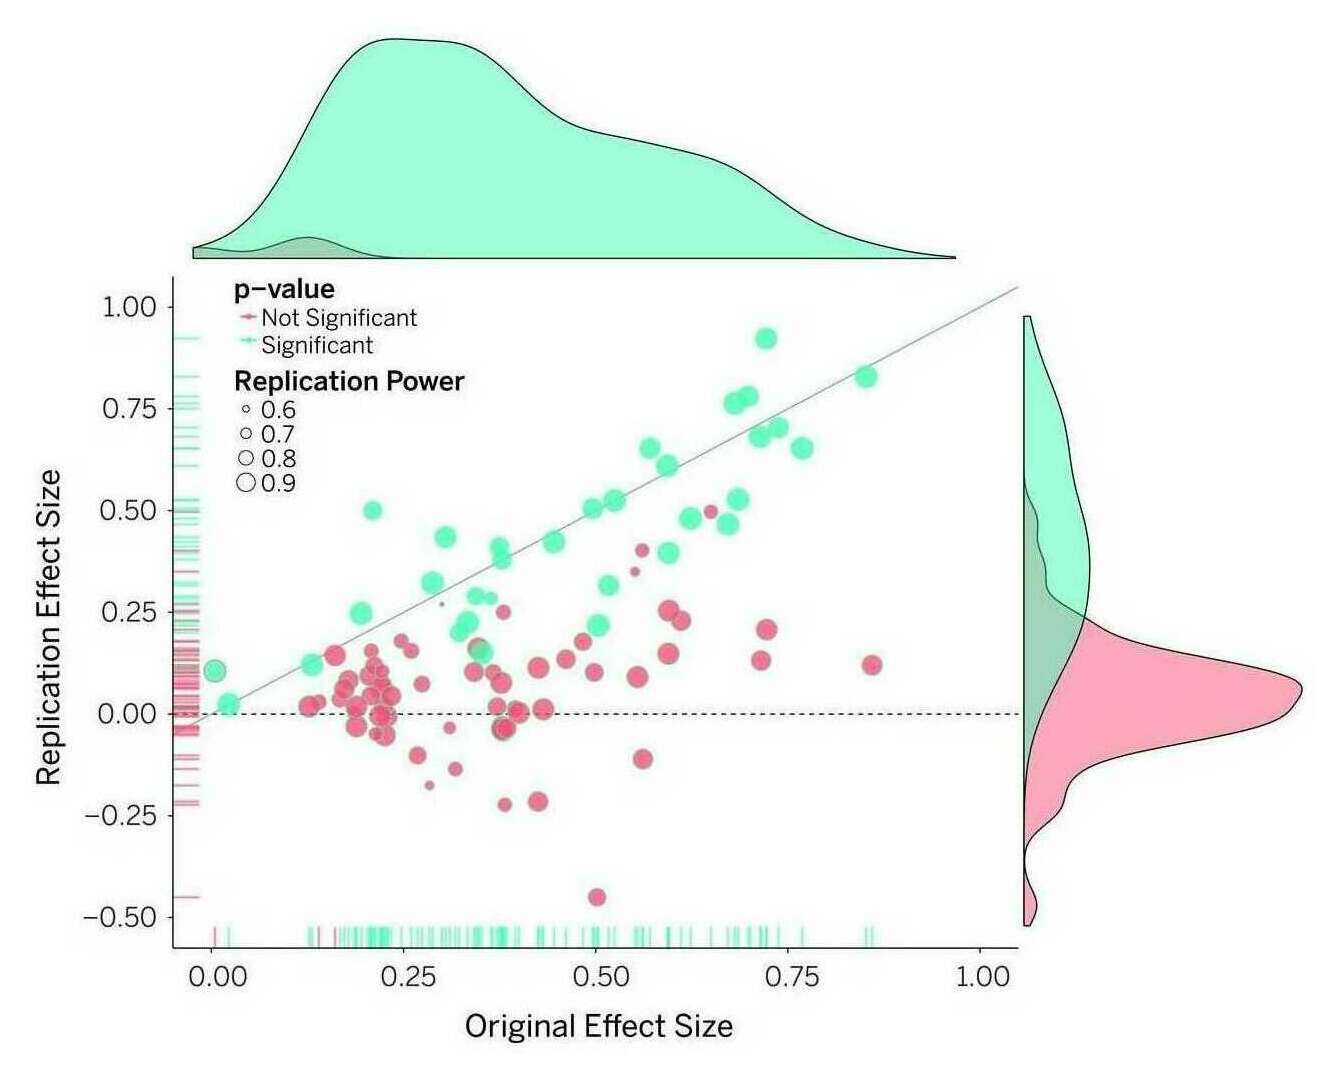 Open Science Collaboration2015: “Figure 1: Original study effect size versus replication effect size (correlation coefficients). Diagonal line represents replication effect size equal to original effect size. Dotted line represents replication effect size of 0. Points below the dotted line were effects in the opposite direction of the original. Density plots are separated by statistically-significant (blue) and non-statistically-significant (red) effects.”